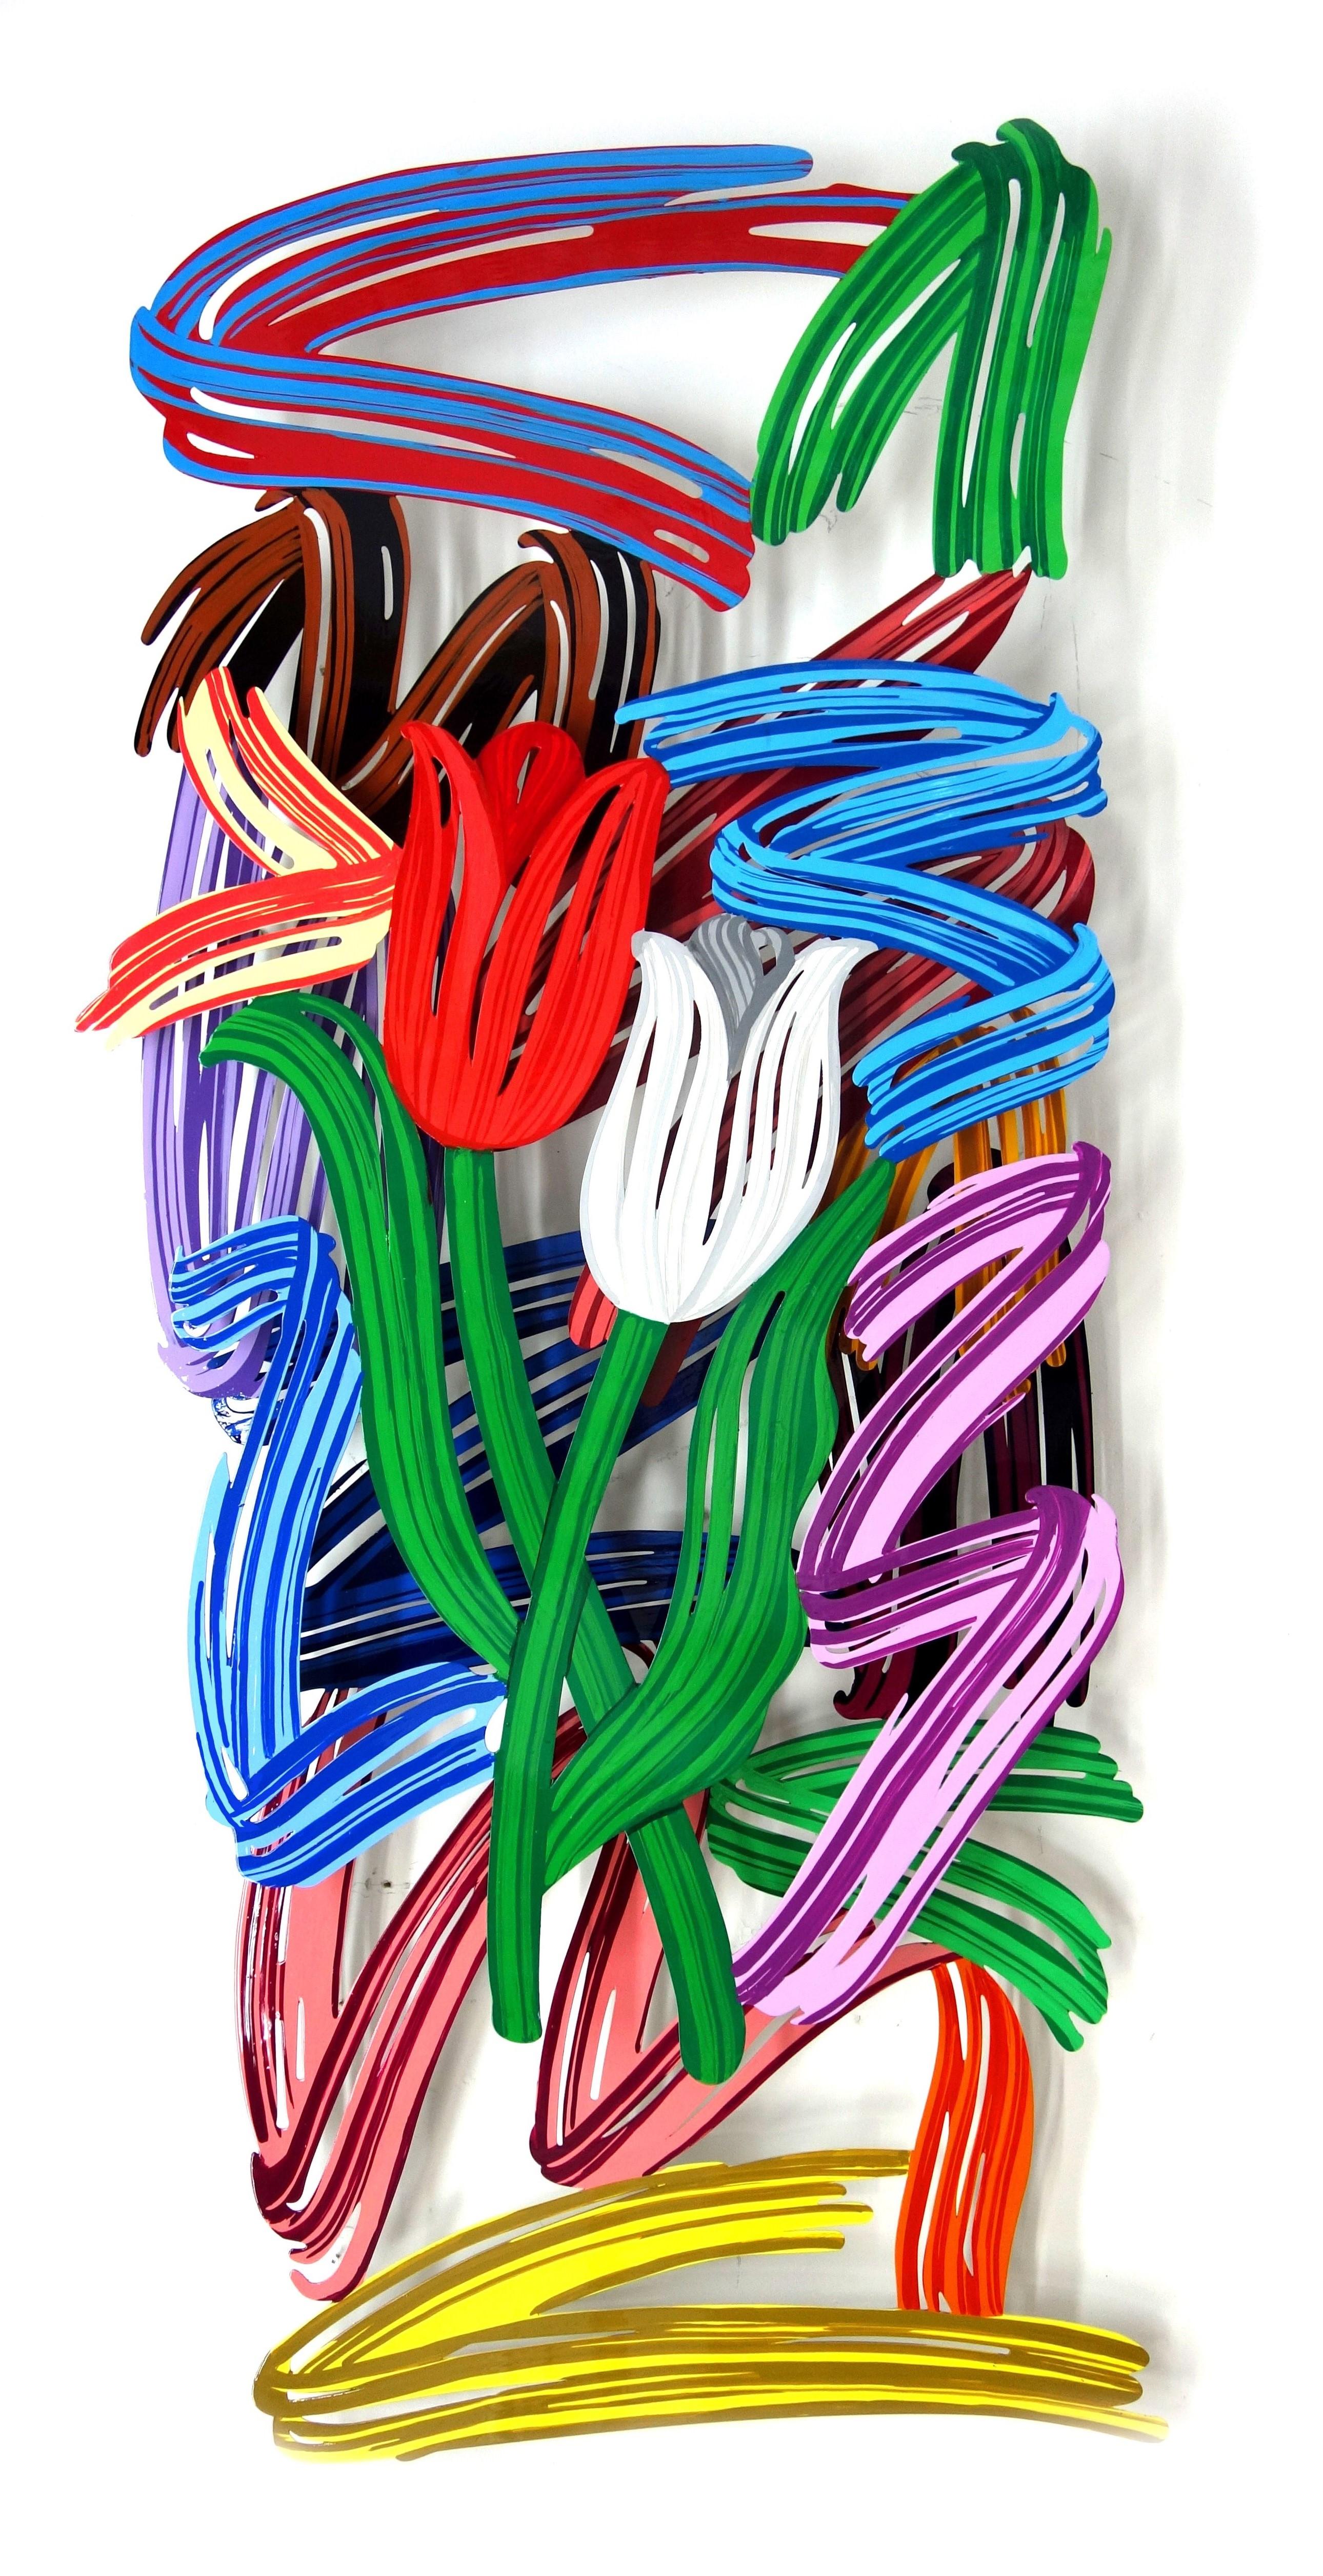 "Tulip Brush Strokes", 3D Hand-painted Metal Wall Sculpture 